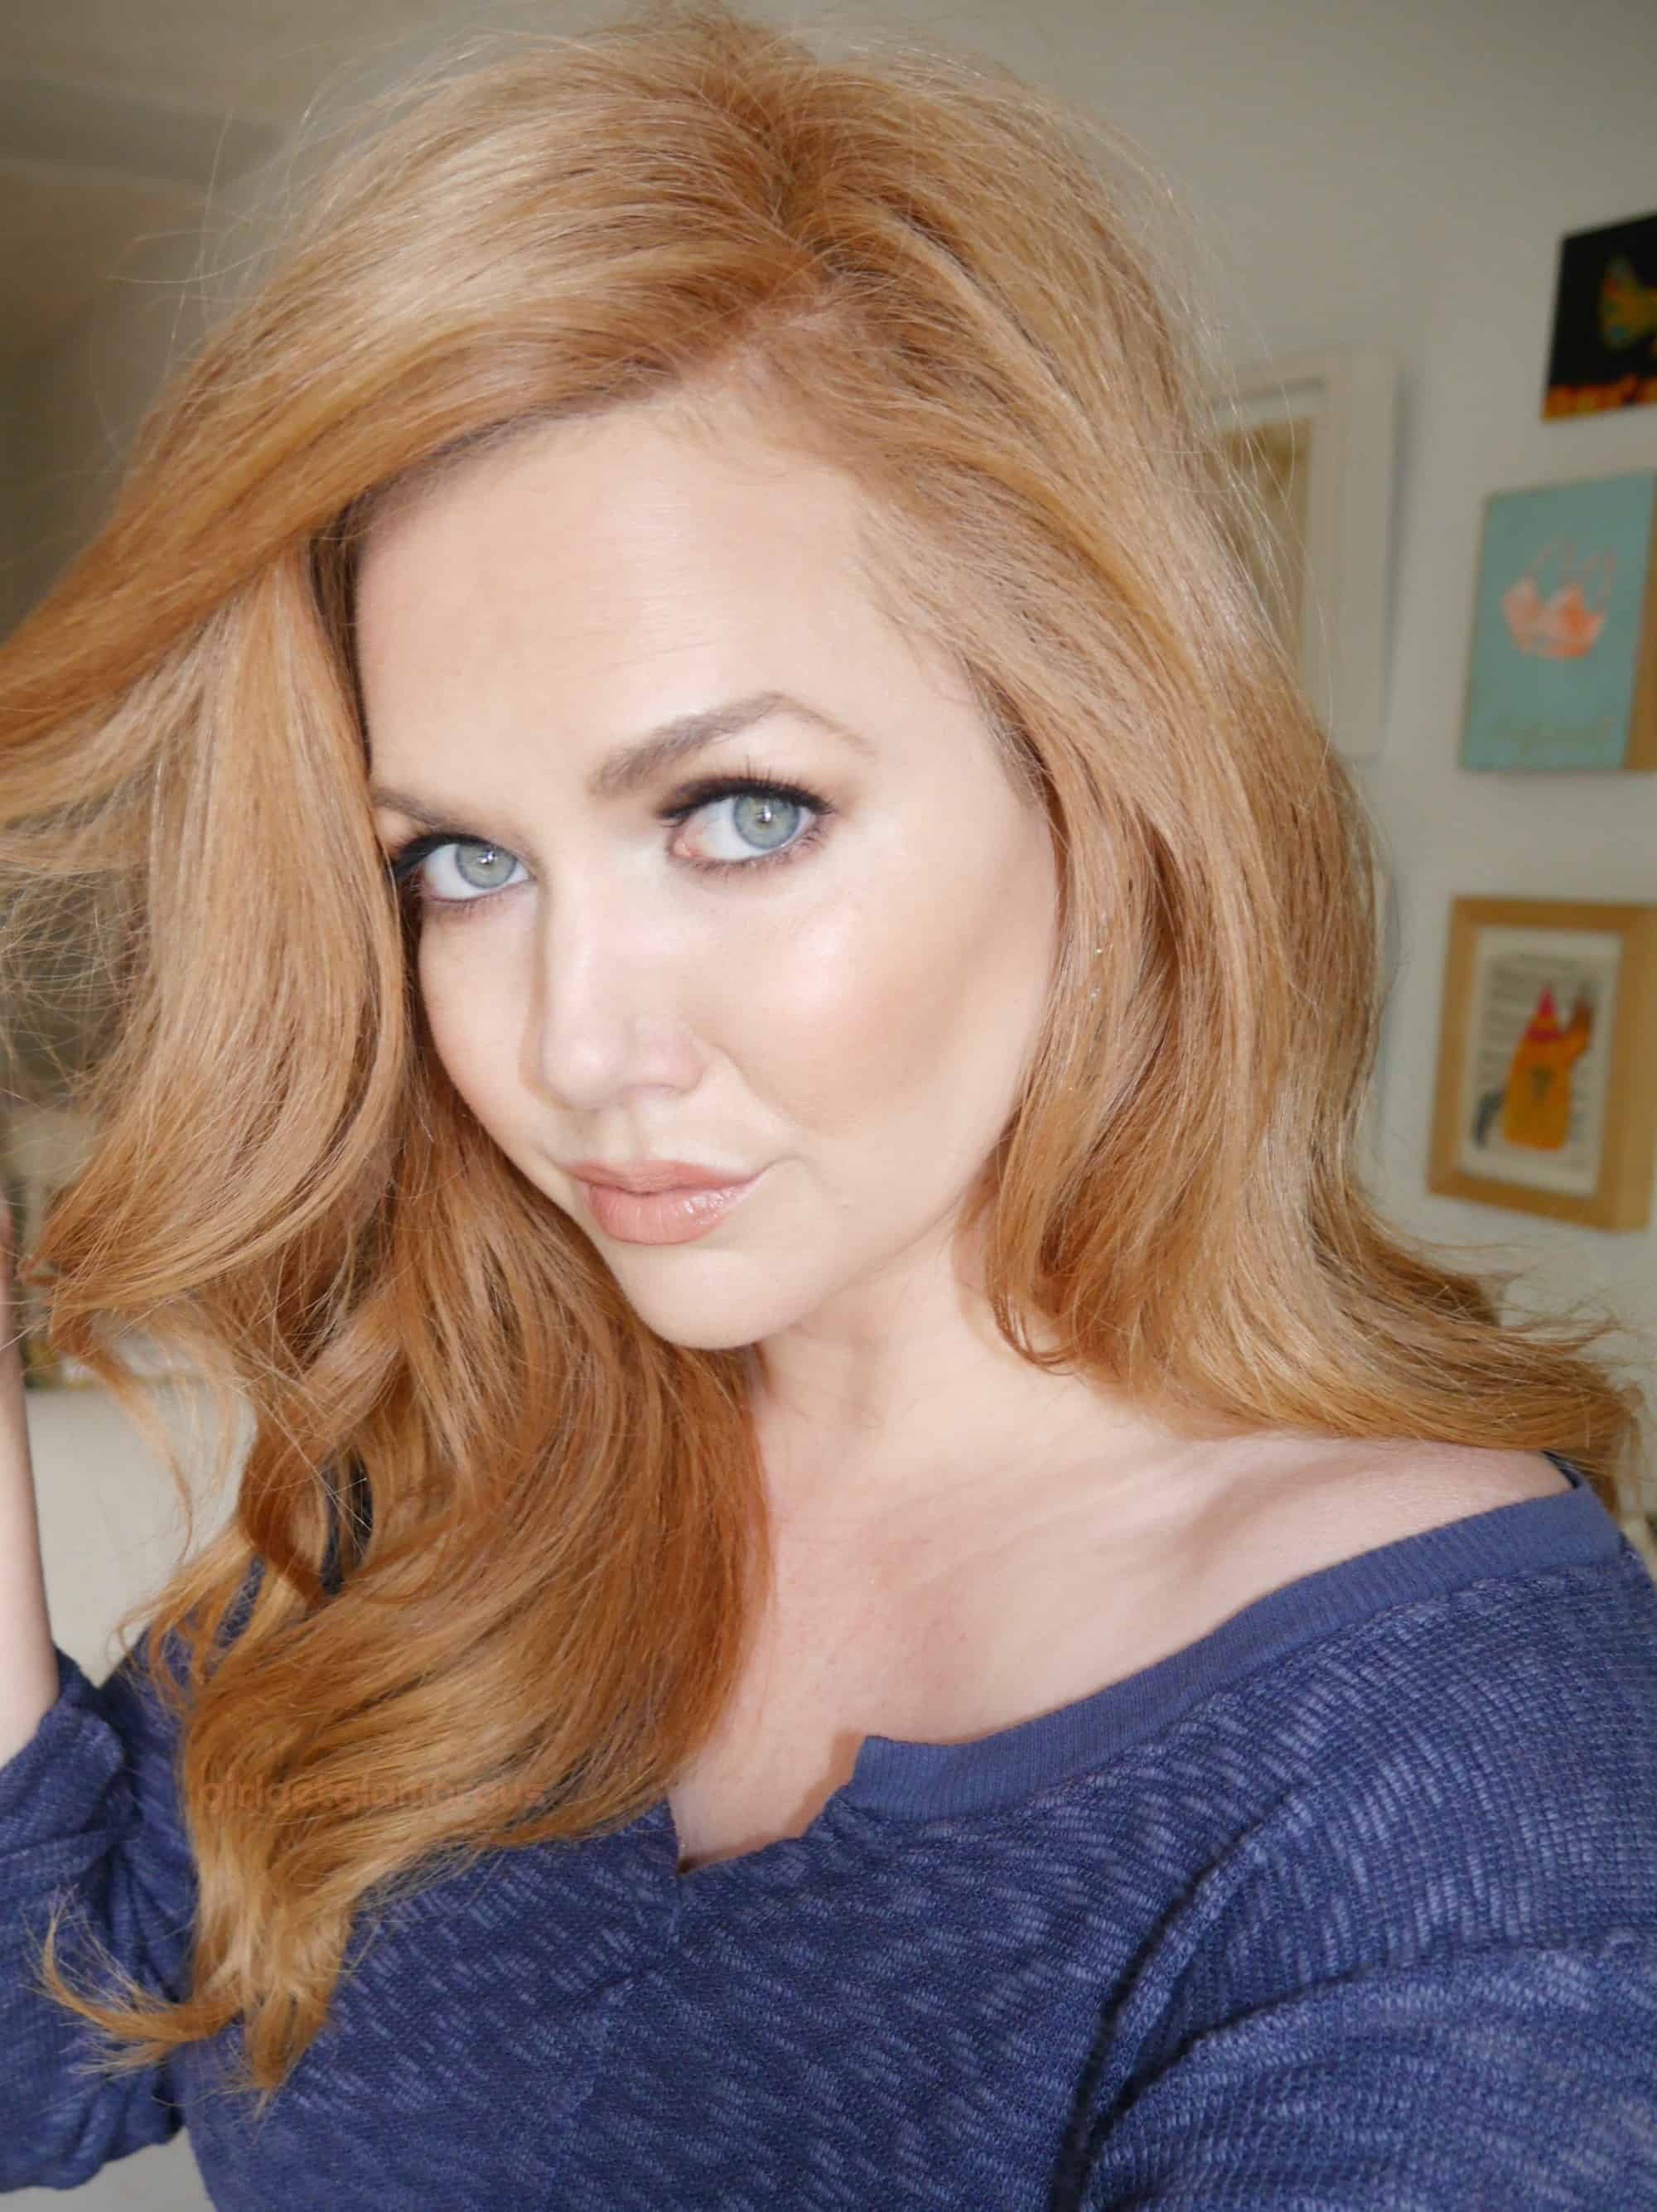 Strawberry Blonde Hair At Home Formula | My Epic Journey ...